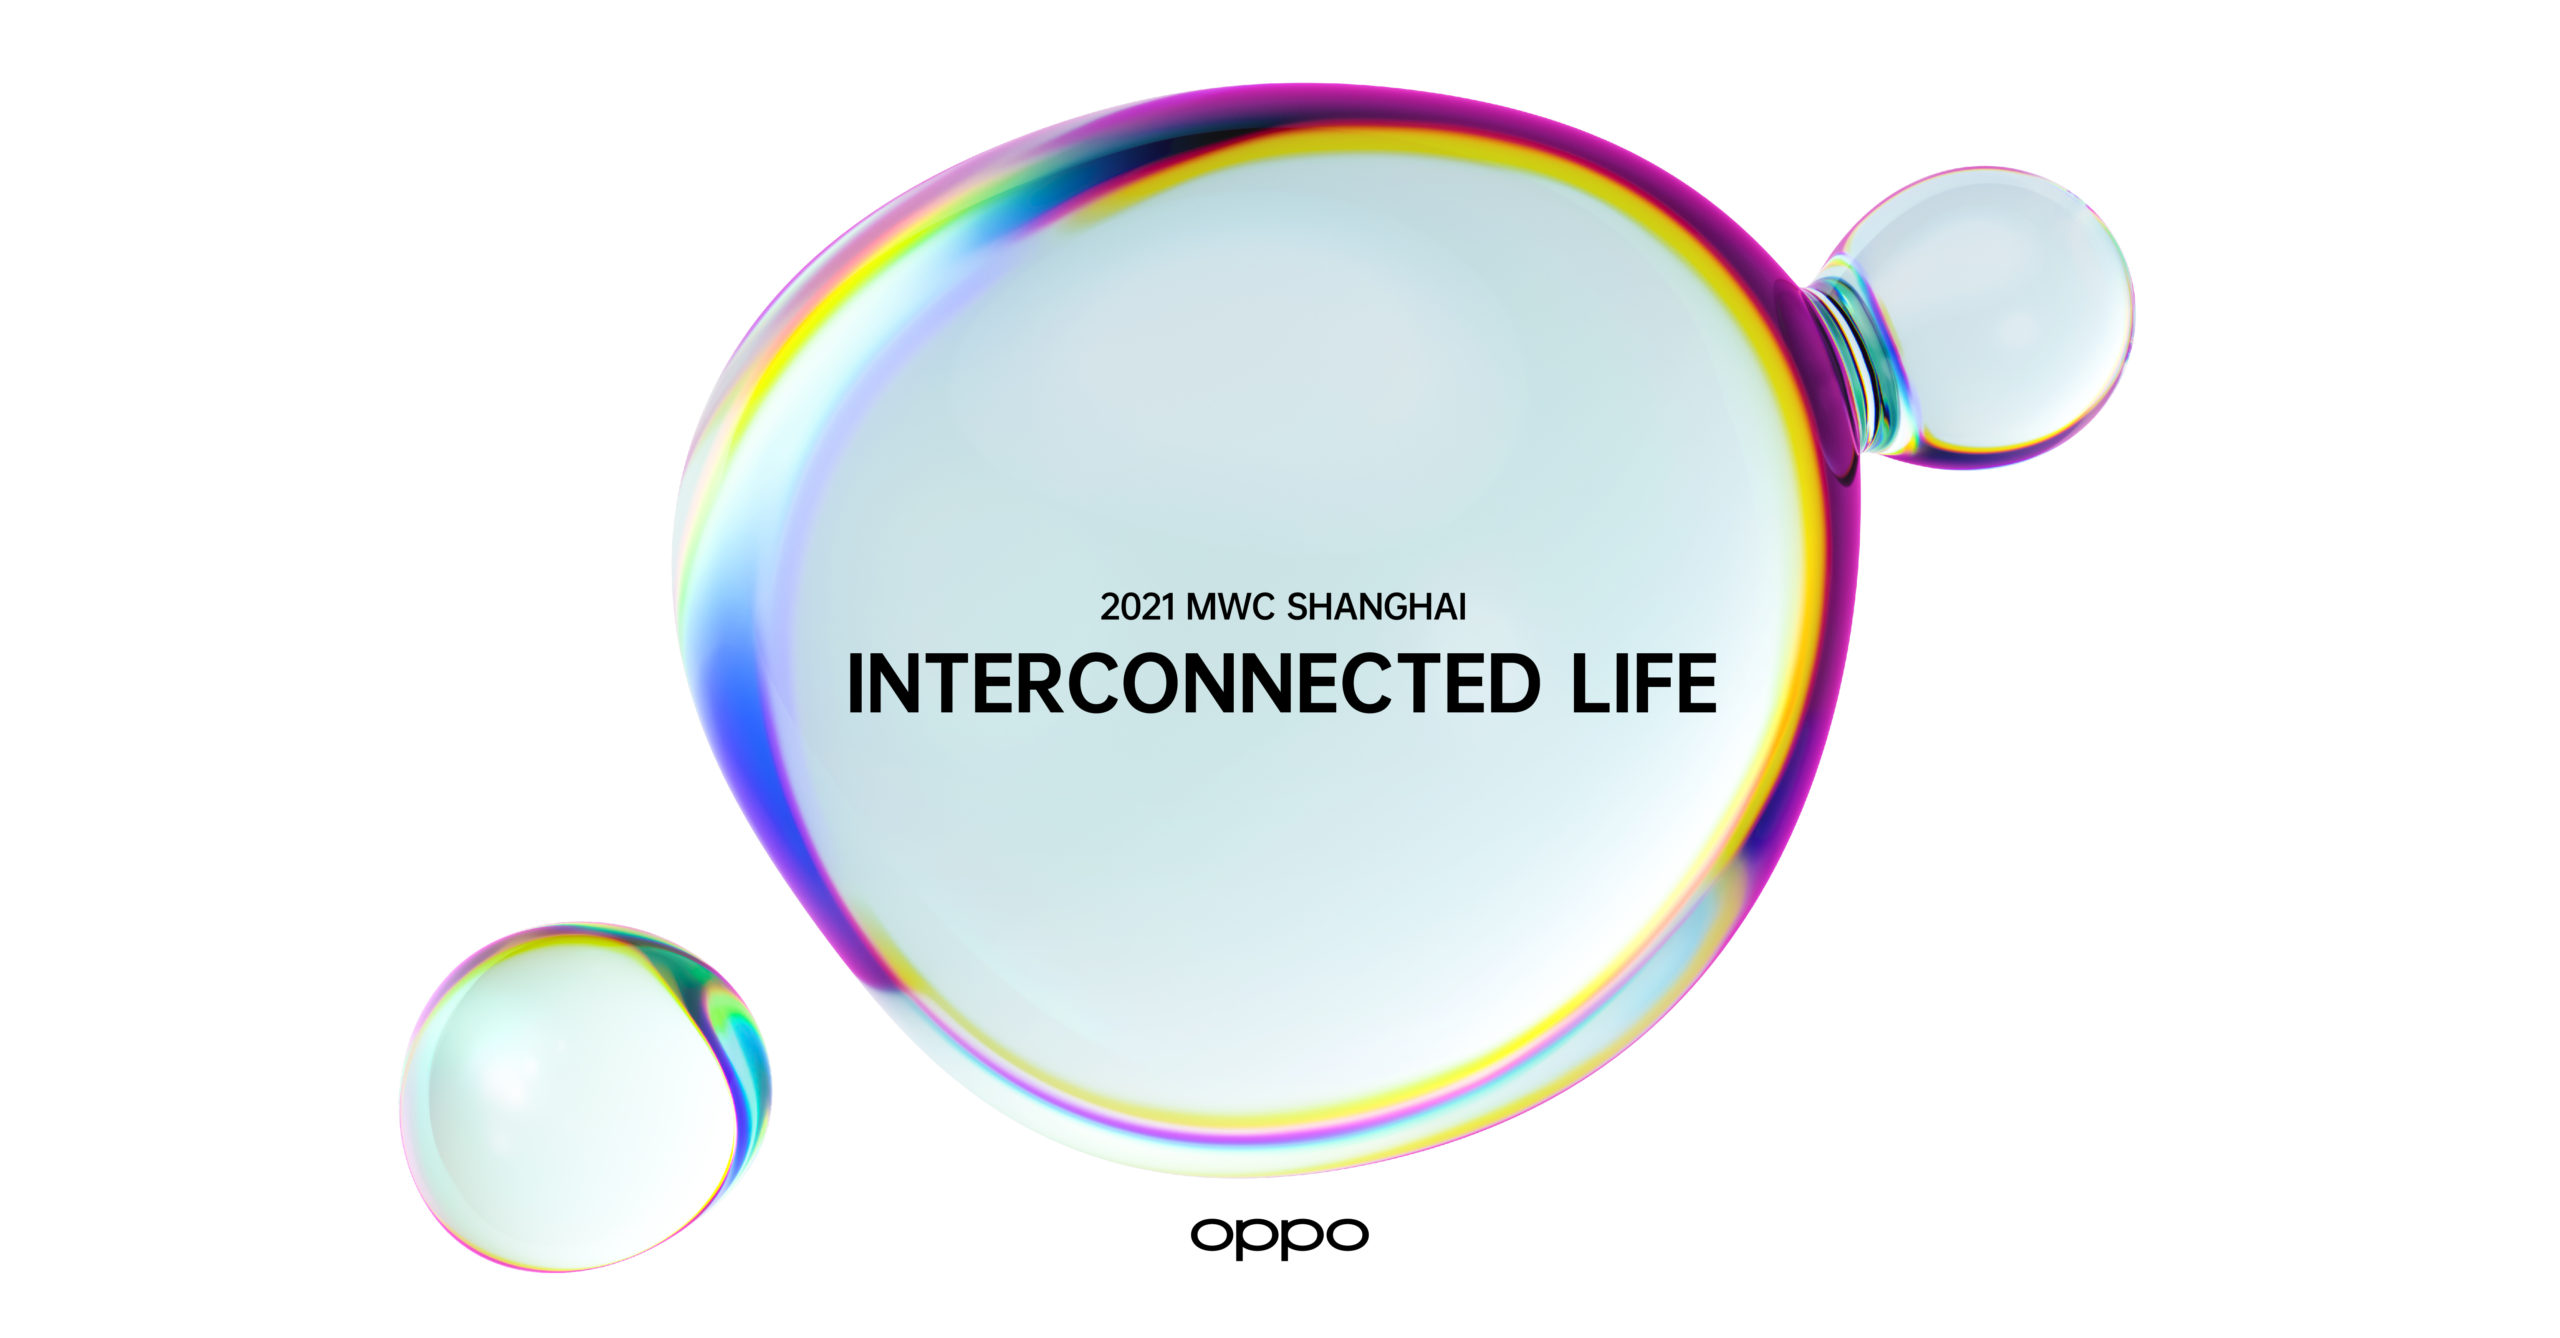 OPPO To Showcase New Technology Breakthroughs And Partnerships At Mobile World Congress Shanghai 2021